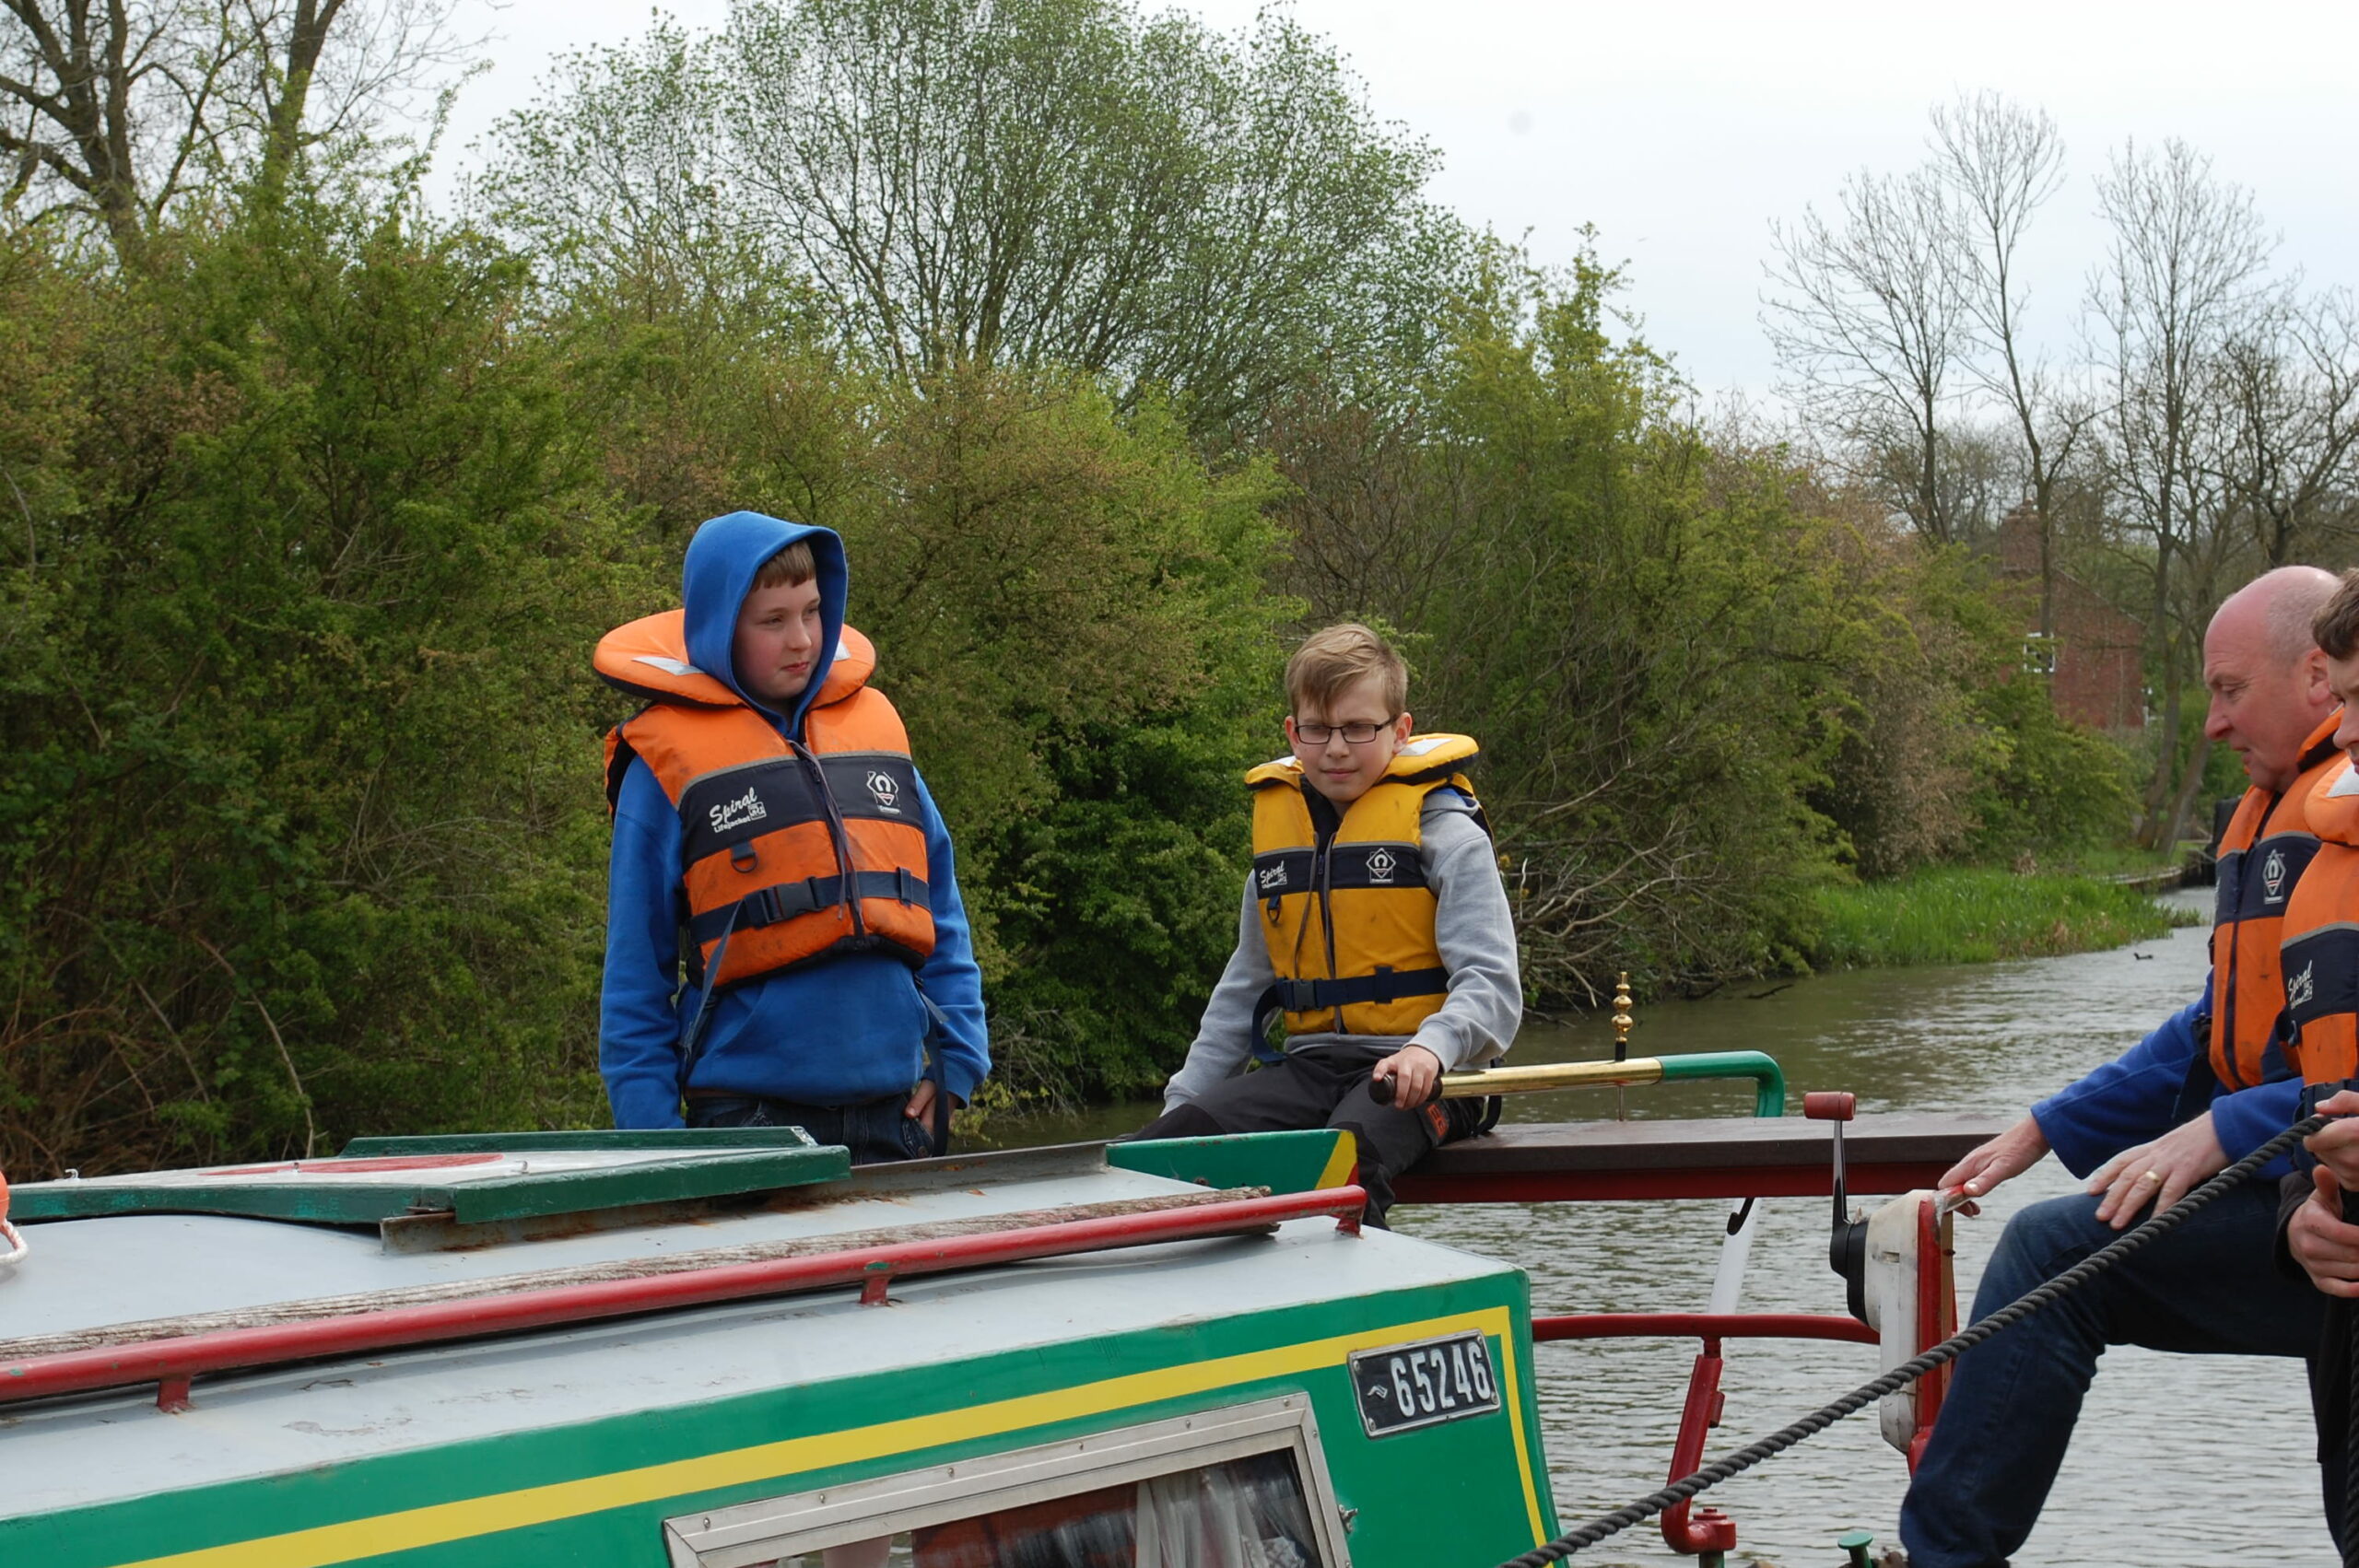 Scouts driving a narrowboat